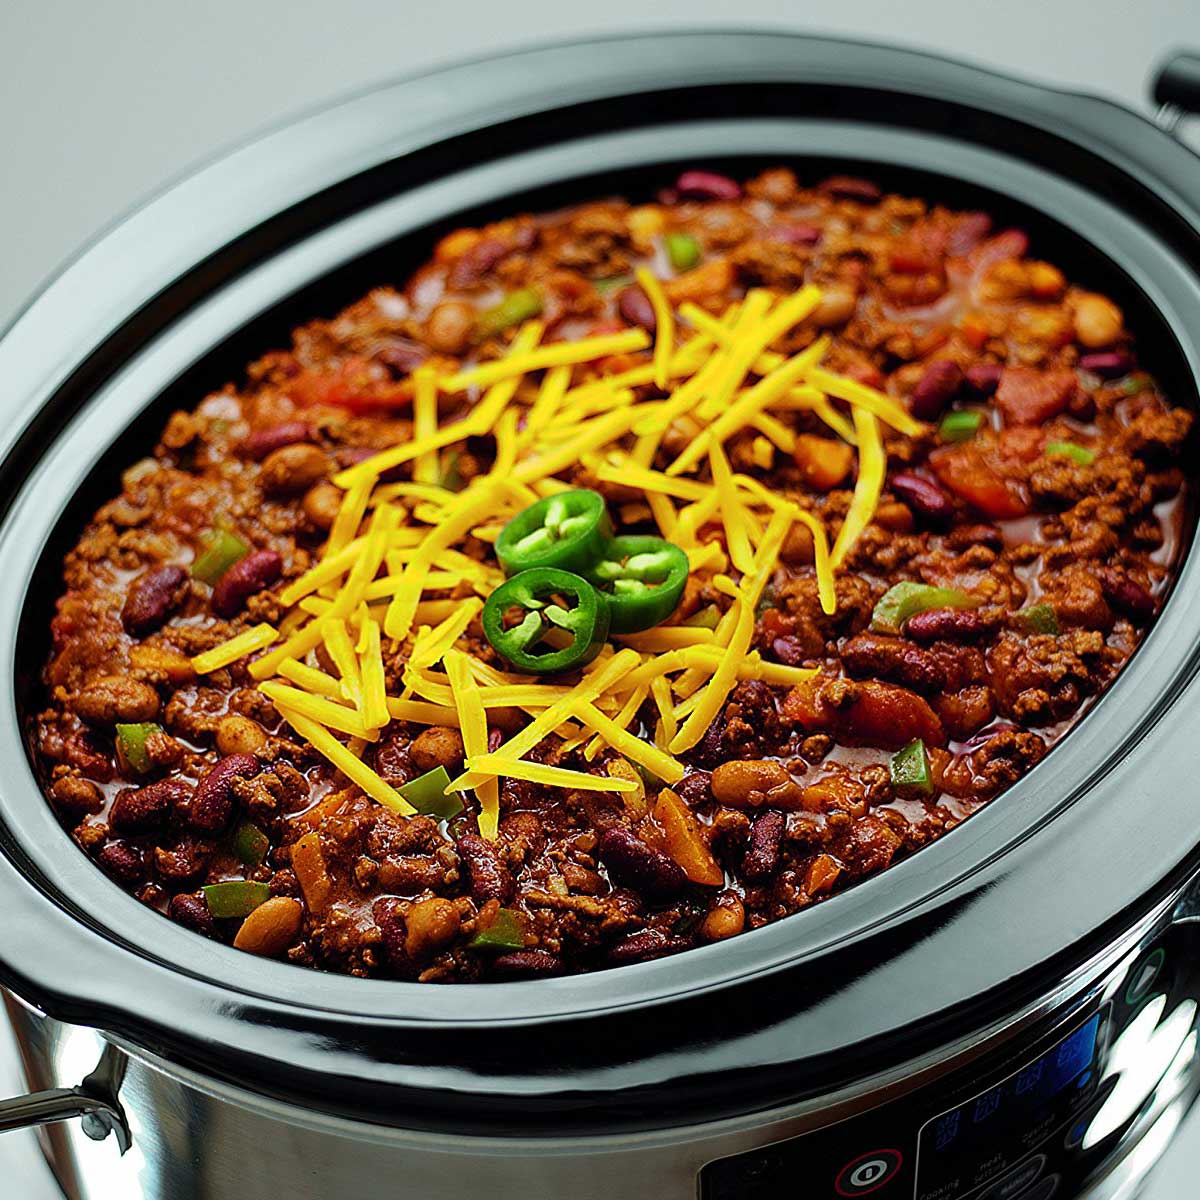 https://kitchenteller.com/wp-content/uploads/2021/05/Hamilton-Beach-Set-Forget-Programmable-Slow-Cooker-With-Temperature-Probe-33967-review-stew.jpg